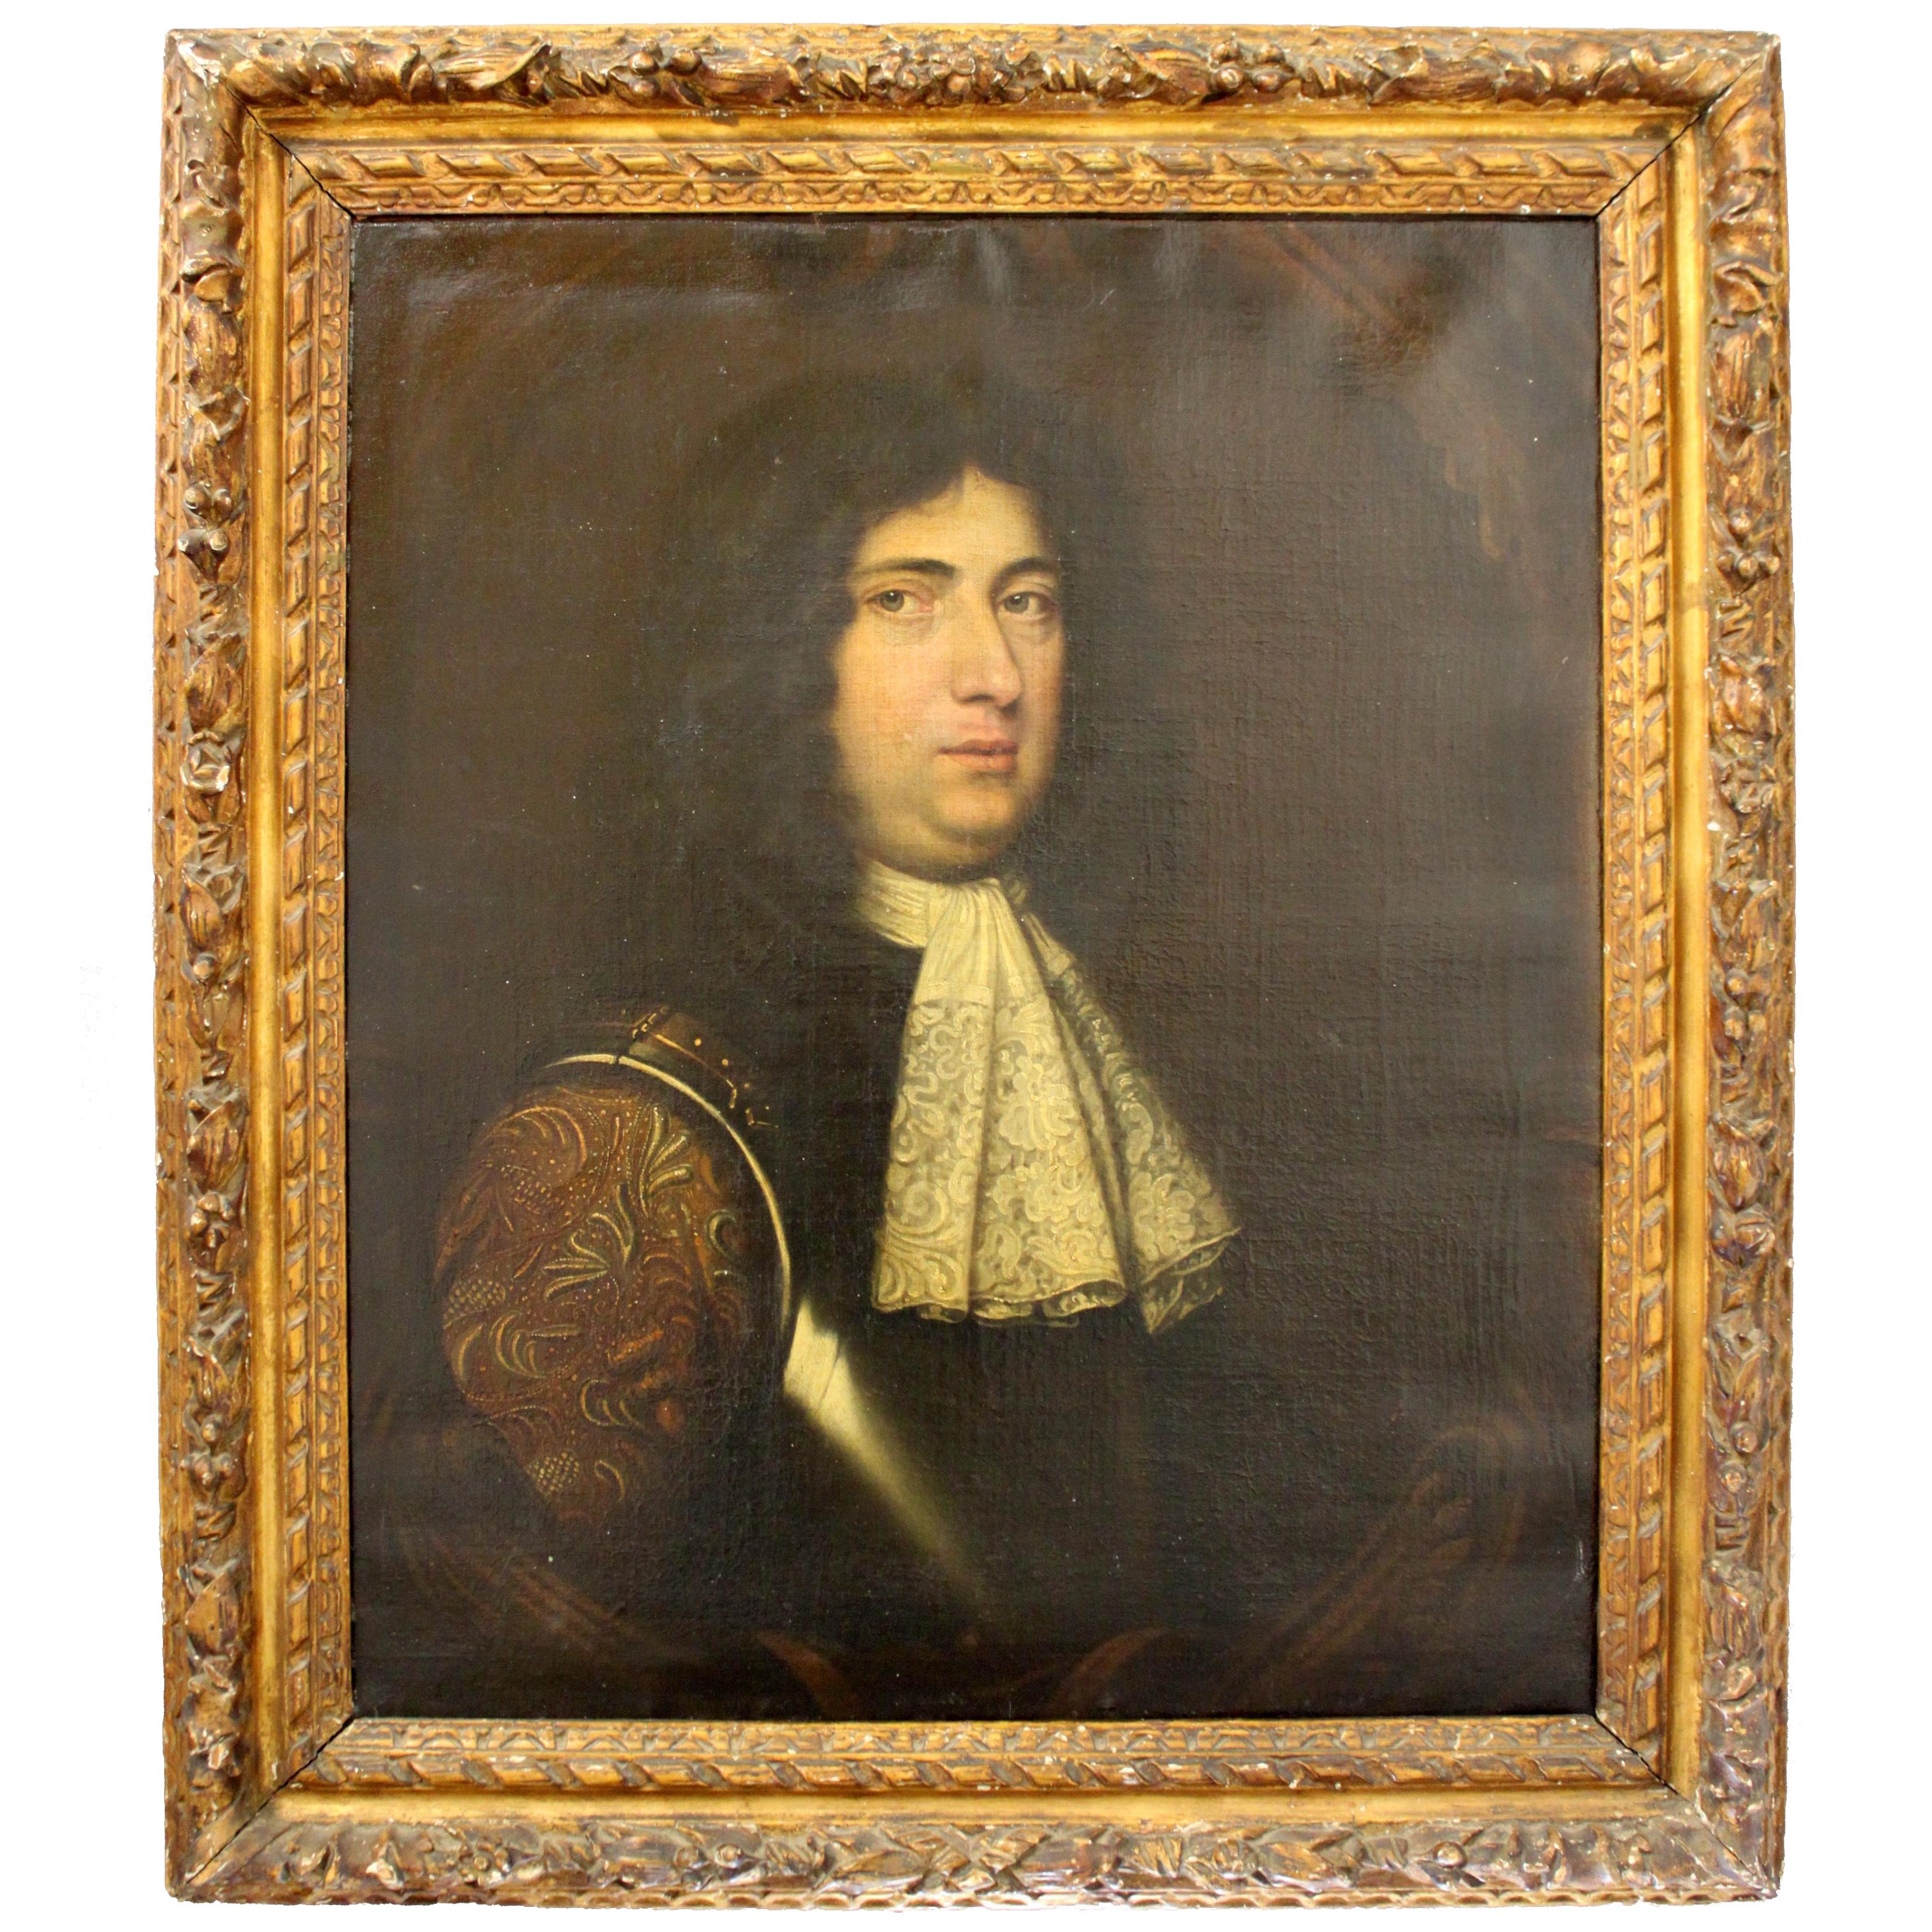 Antique Oil Painting, Portrait of a Gent in Armour, circa 1680, by Mary Beale